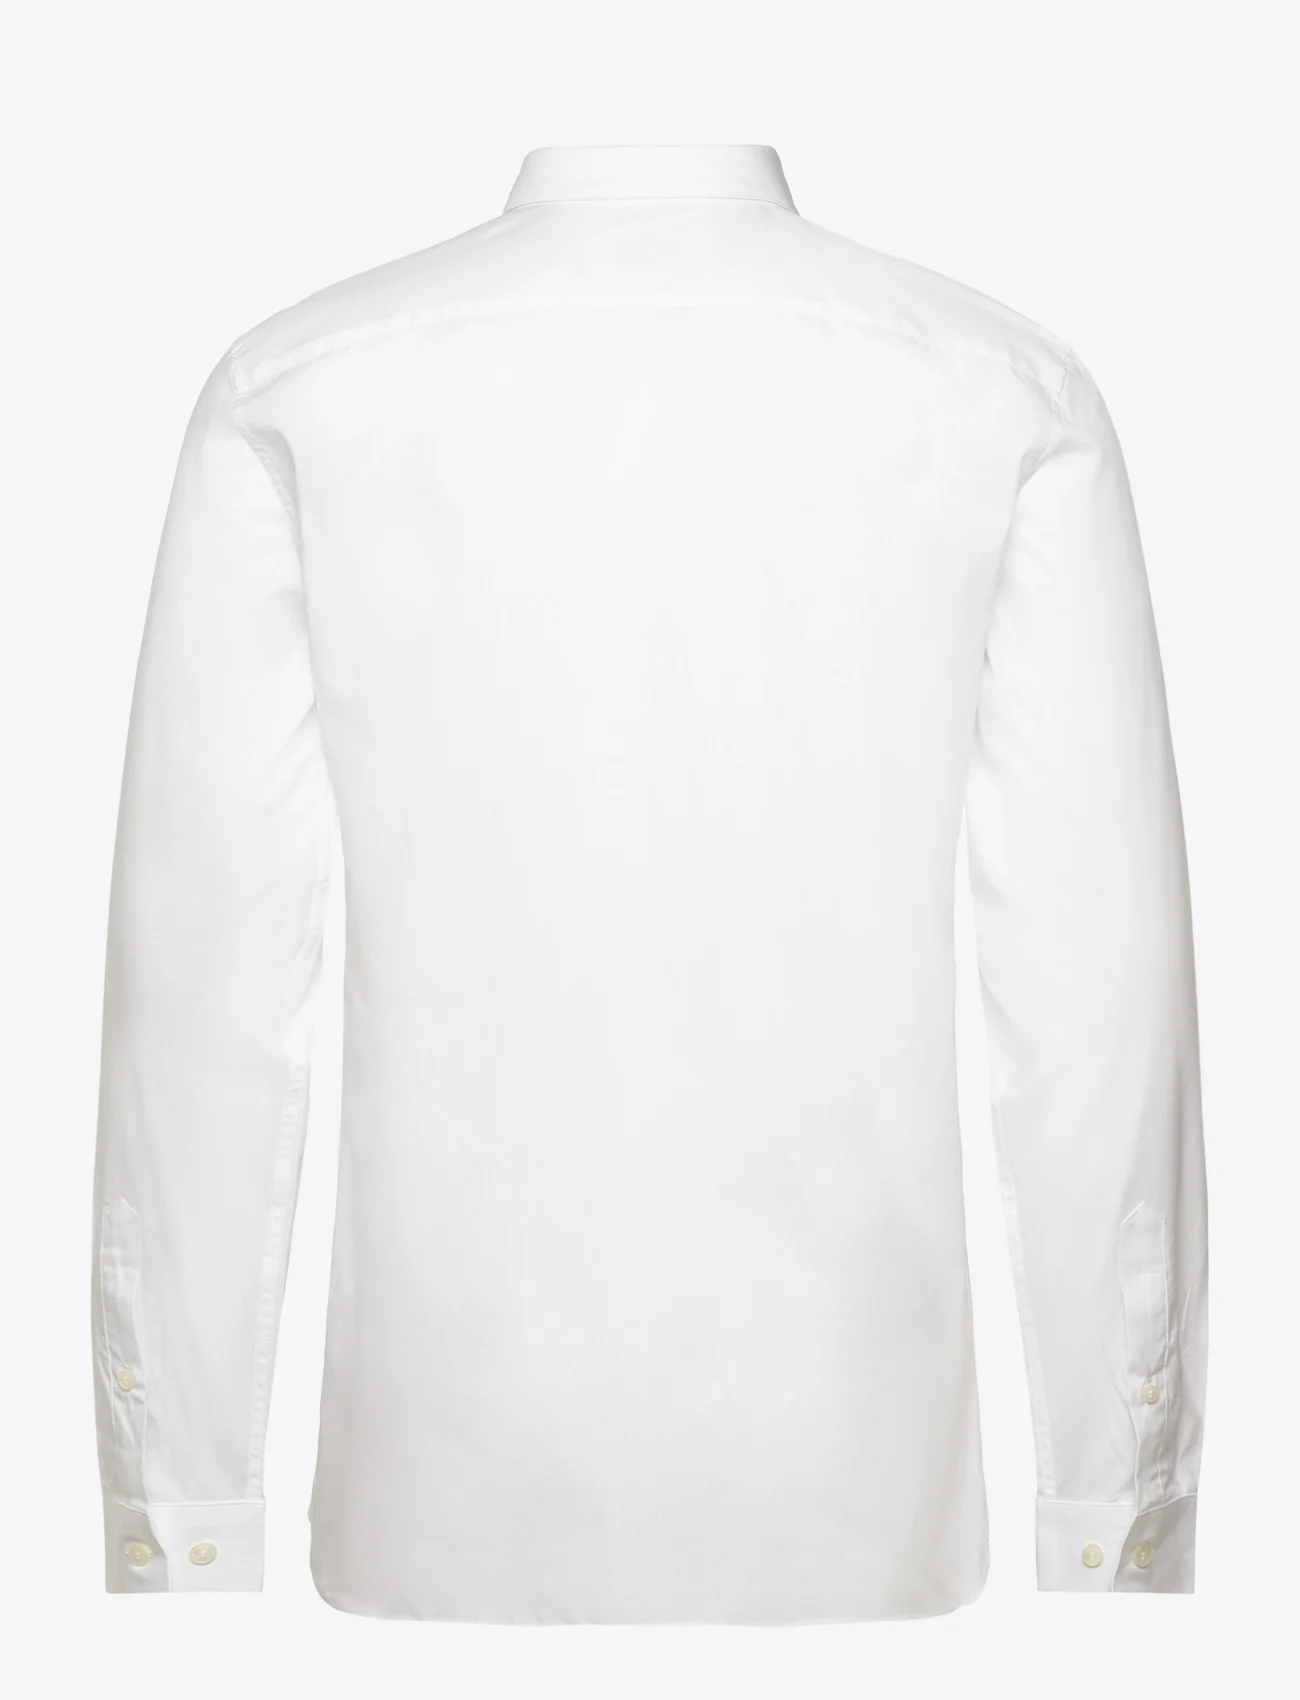 Lacoste - WOVEN SHIRTS - casual shirts - white - 1